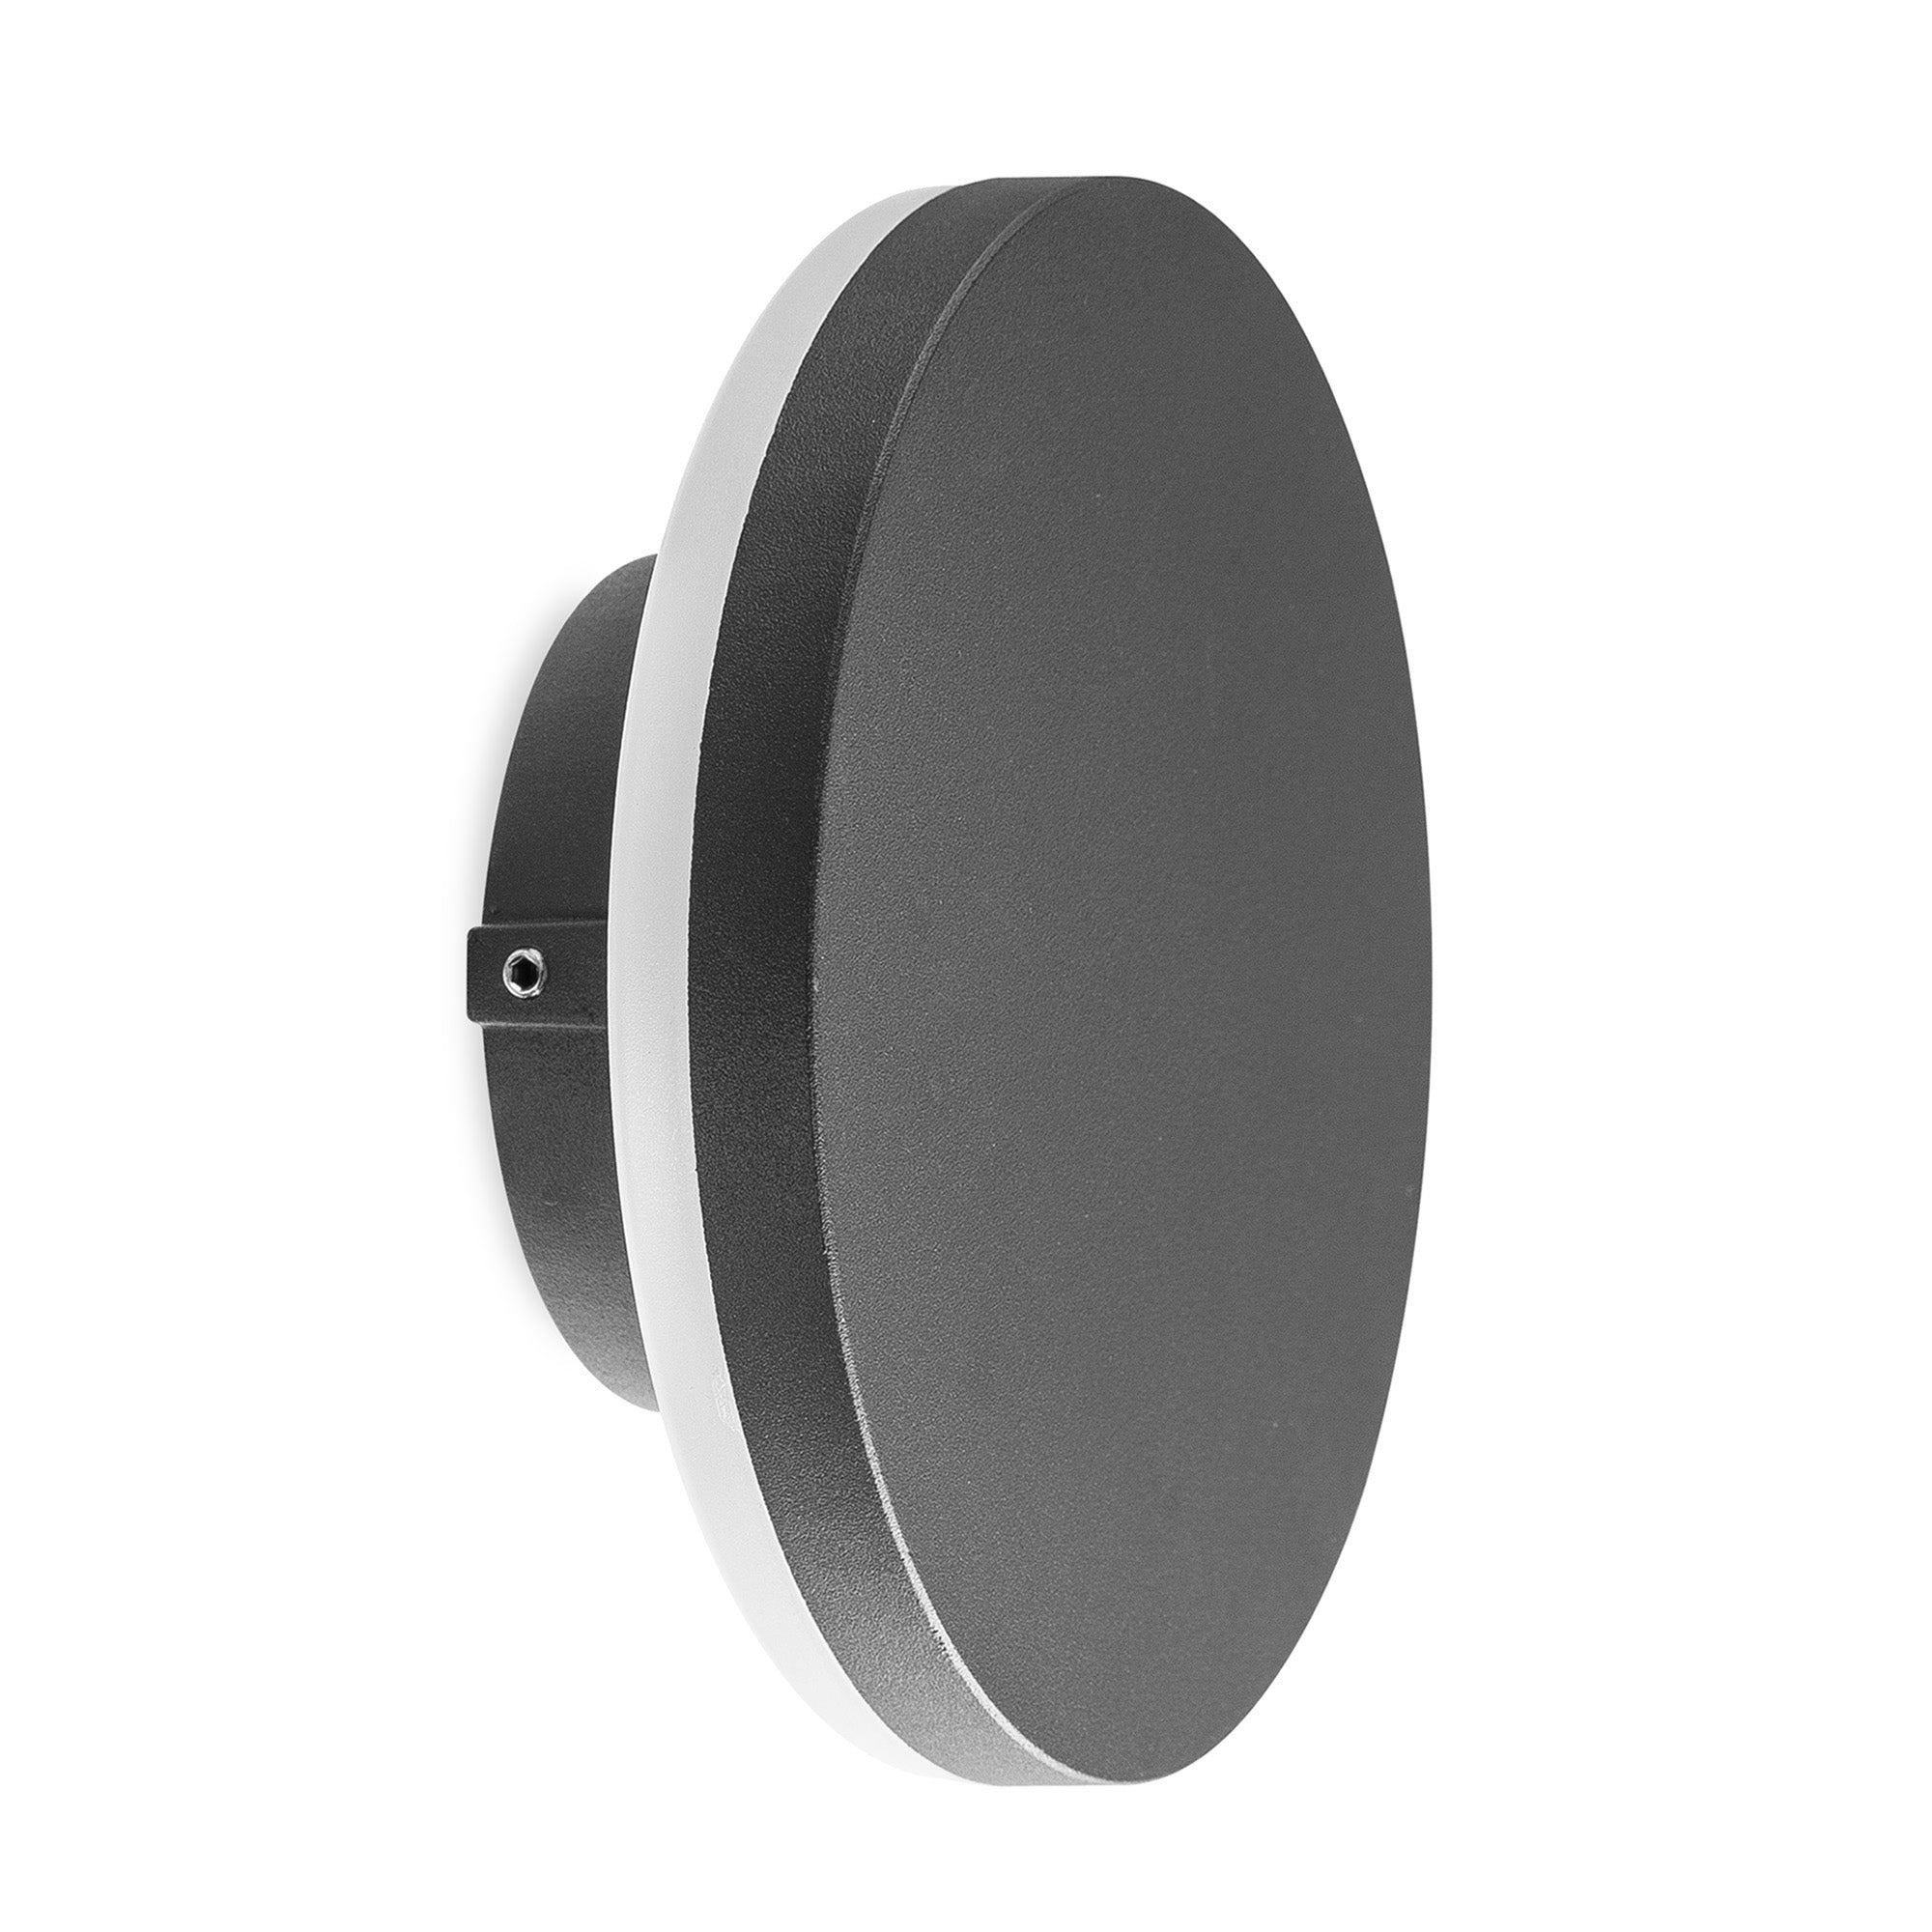 Bora Round/Square Wall Lamp, 9.6W LED, 3000K, 720lm, IP54, White,Anthracite,Rust Brown  3yrs Warranty